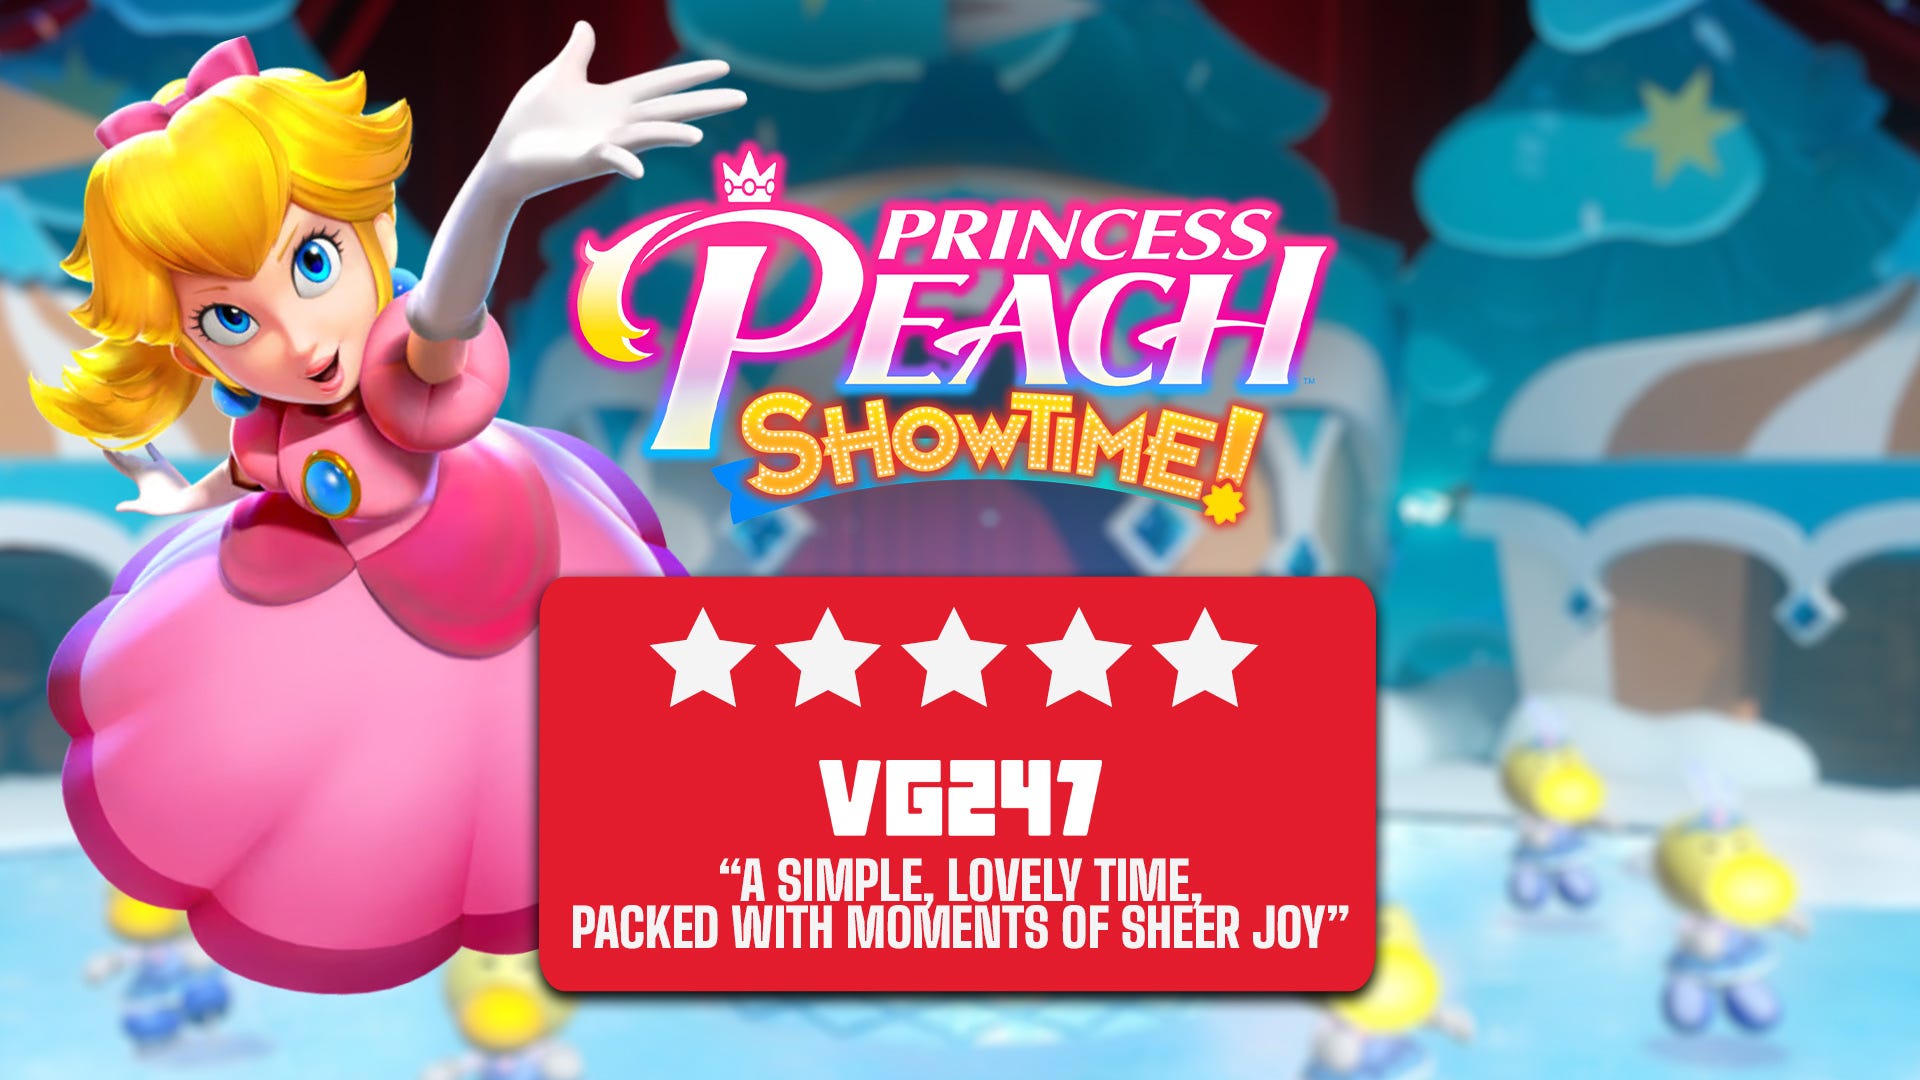 Princess Peach: Showtime review – Nintendo’s leading lady is anything but asleep at the Switch